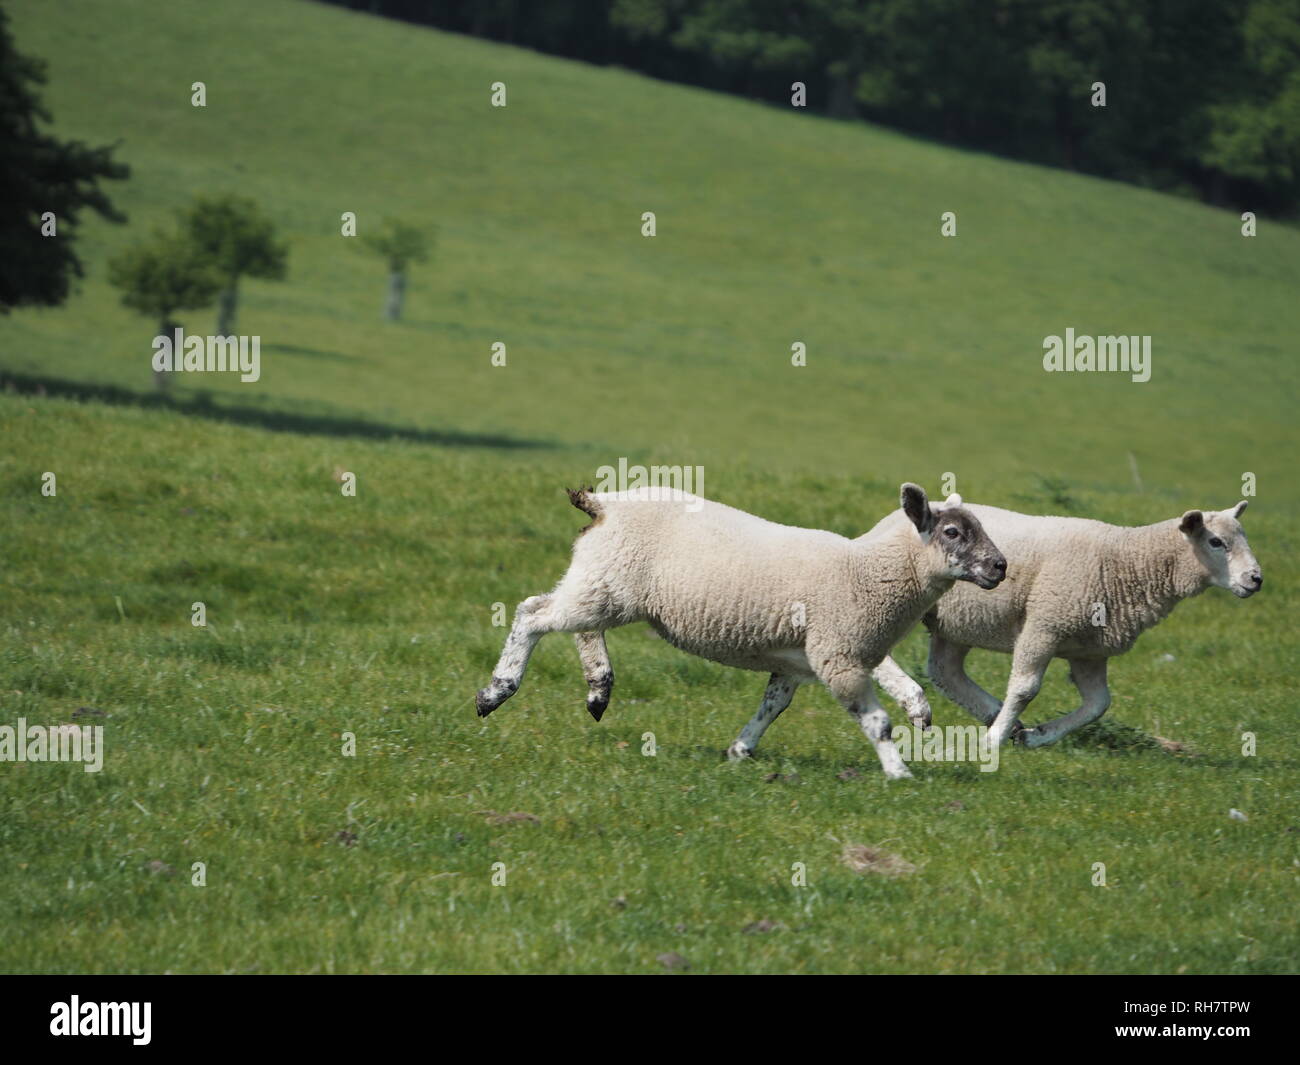 Two young lambs run across a field together to rejoin the rest of the flock. Stock Photo